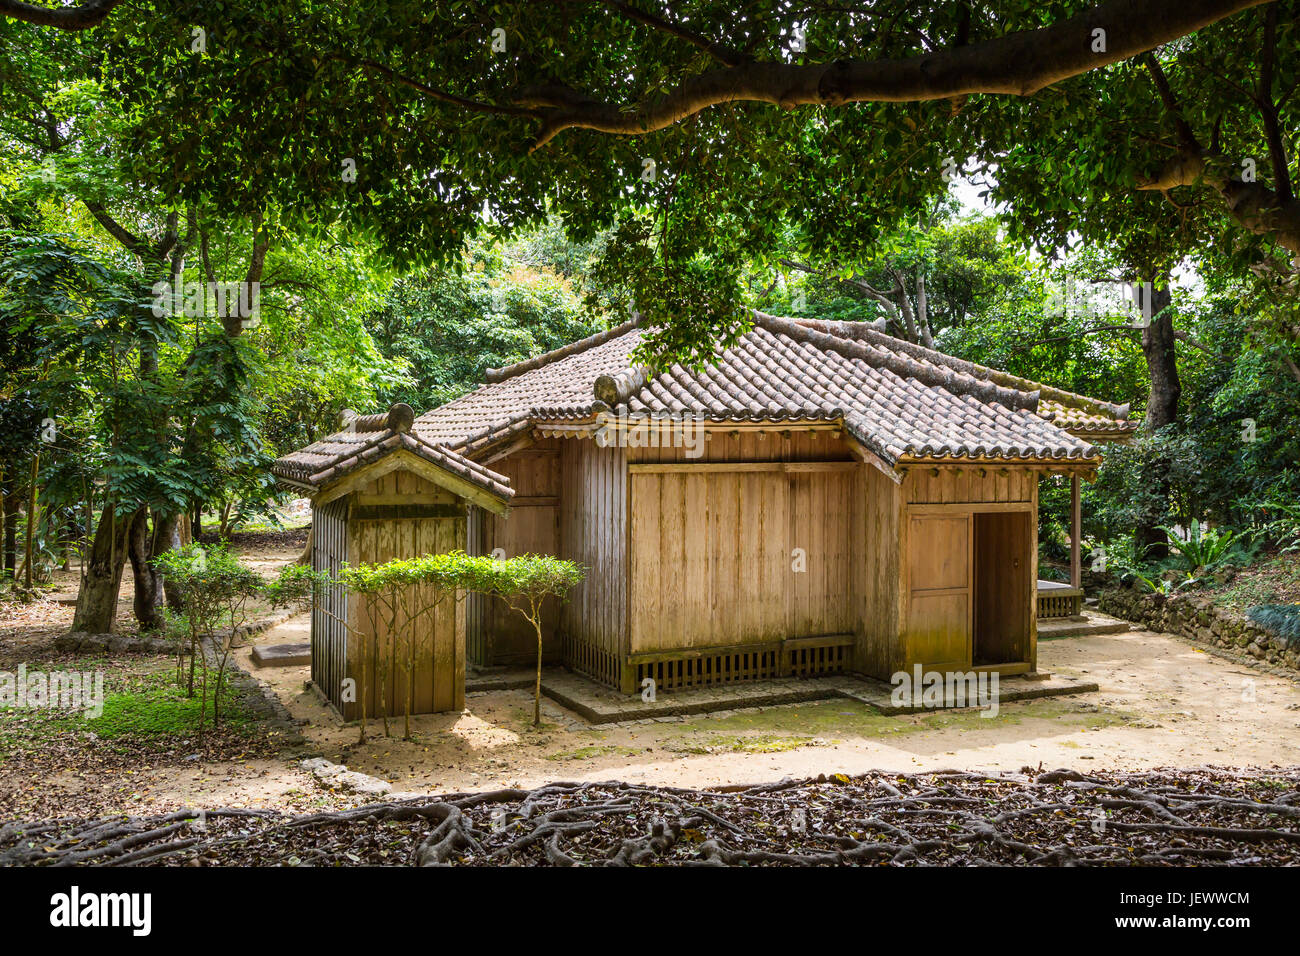 Japanese architecture at the Shurijo Castle in Naha, Okinawa, Japan. Stock Photo